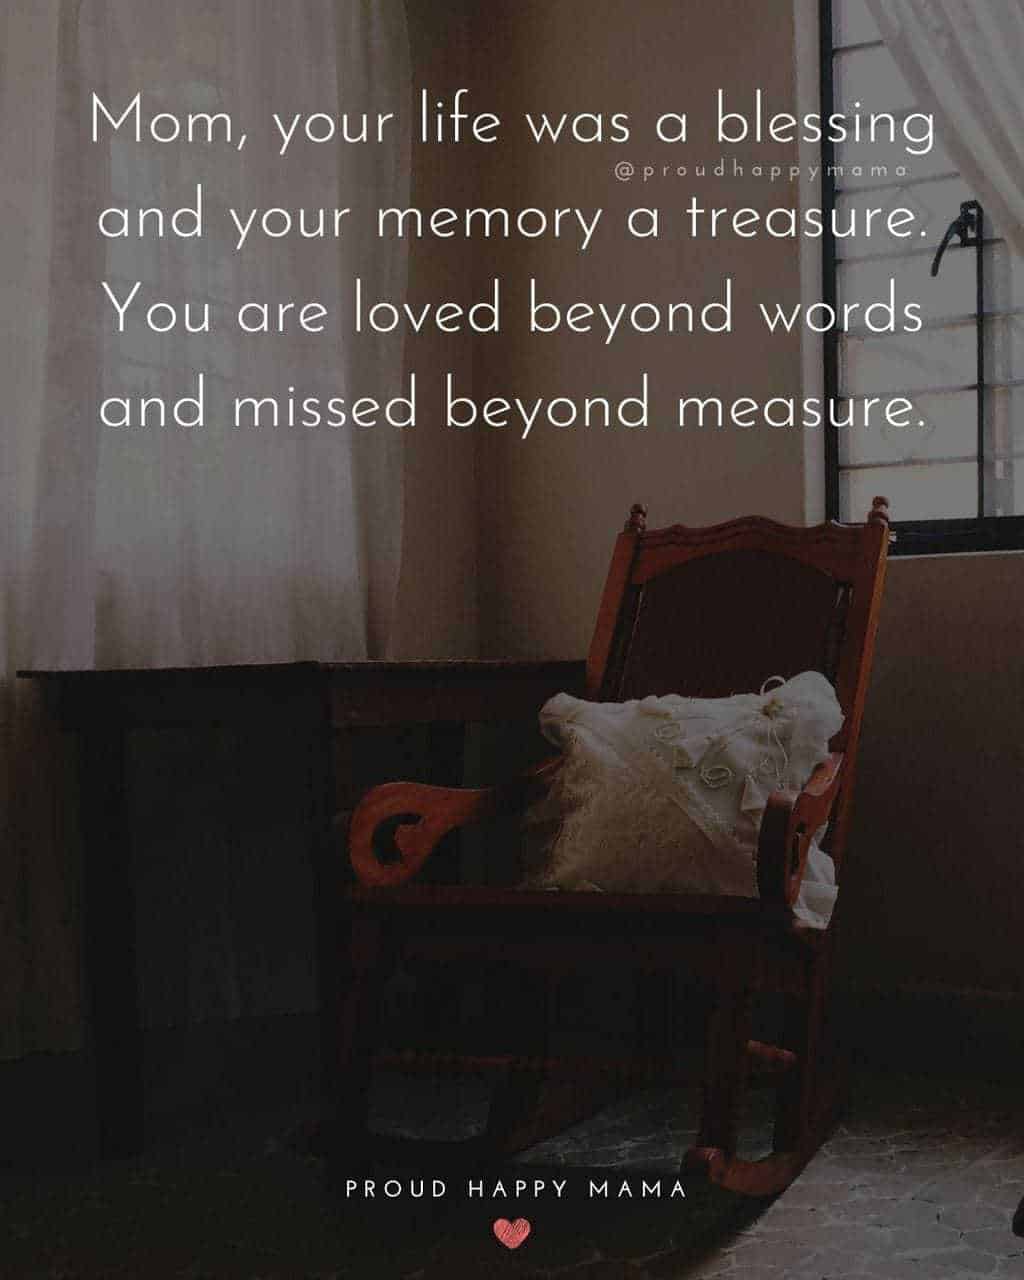 Empty rocking chair with which frilly cushion and text overlay. 'Mom, your life was a blessing and your memory a treasure. You are loved beyond words and missed beyond measure.’